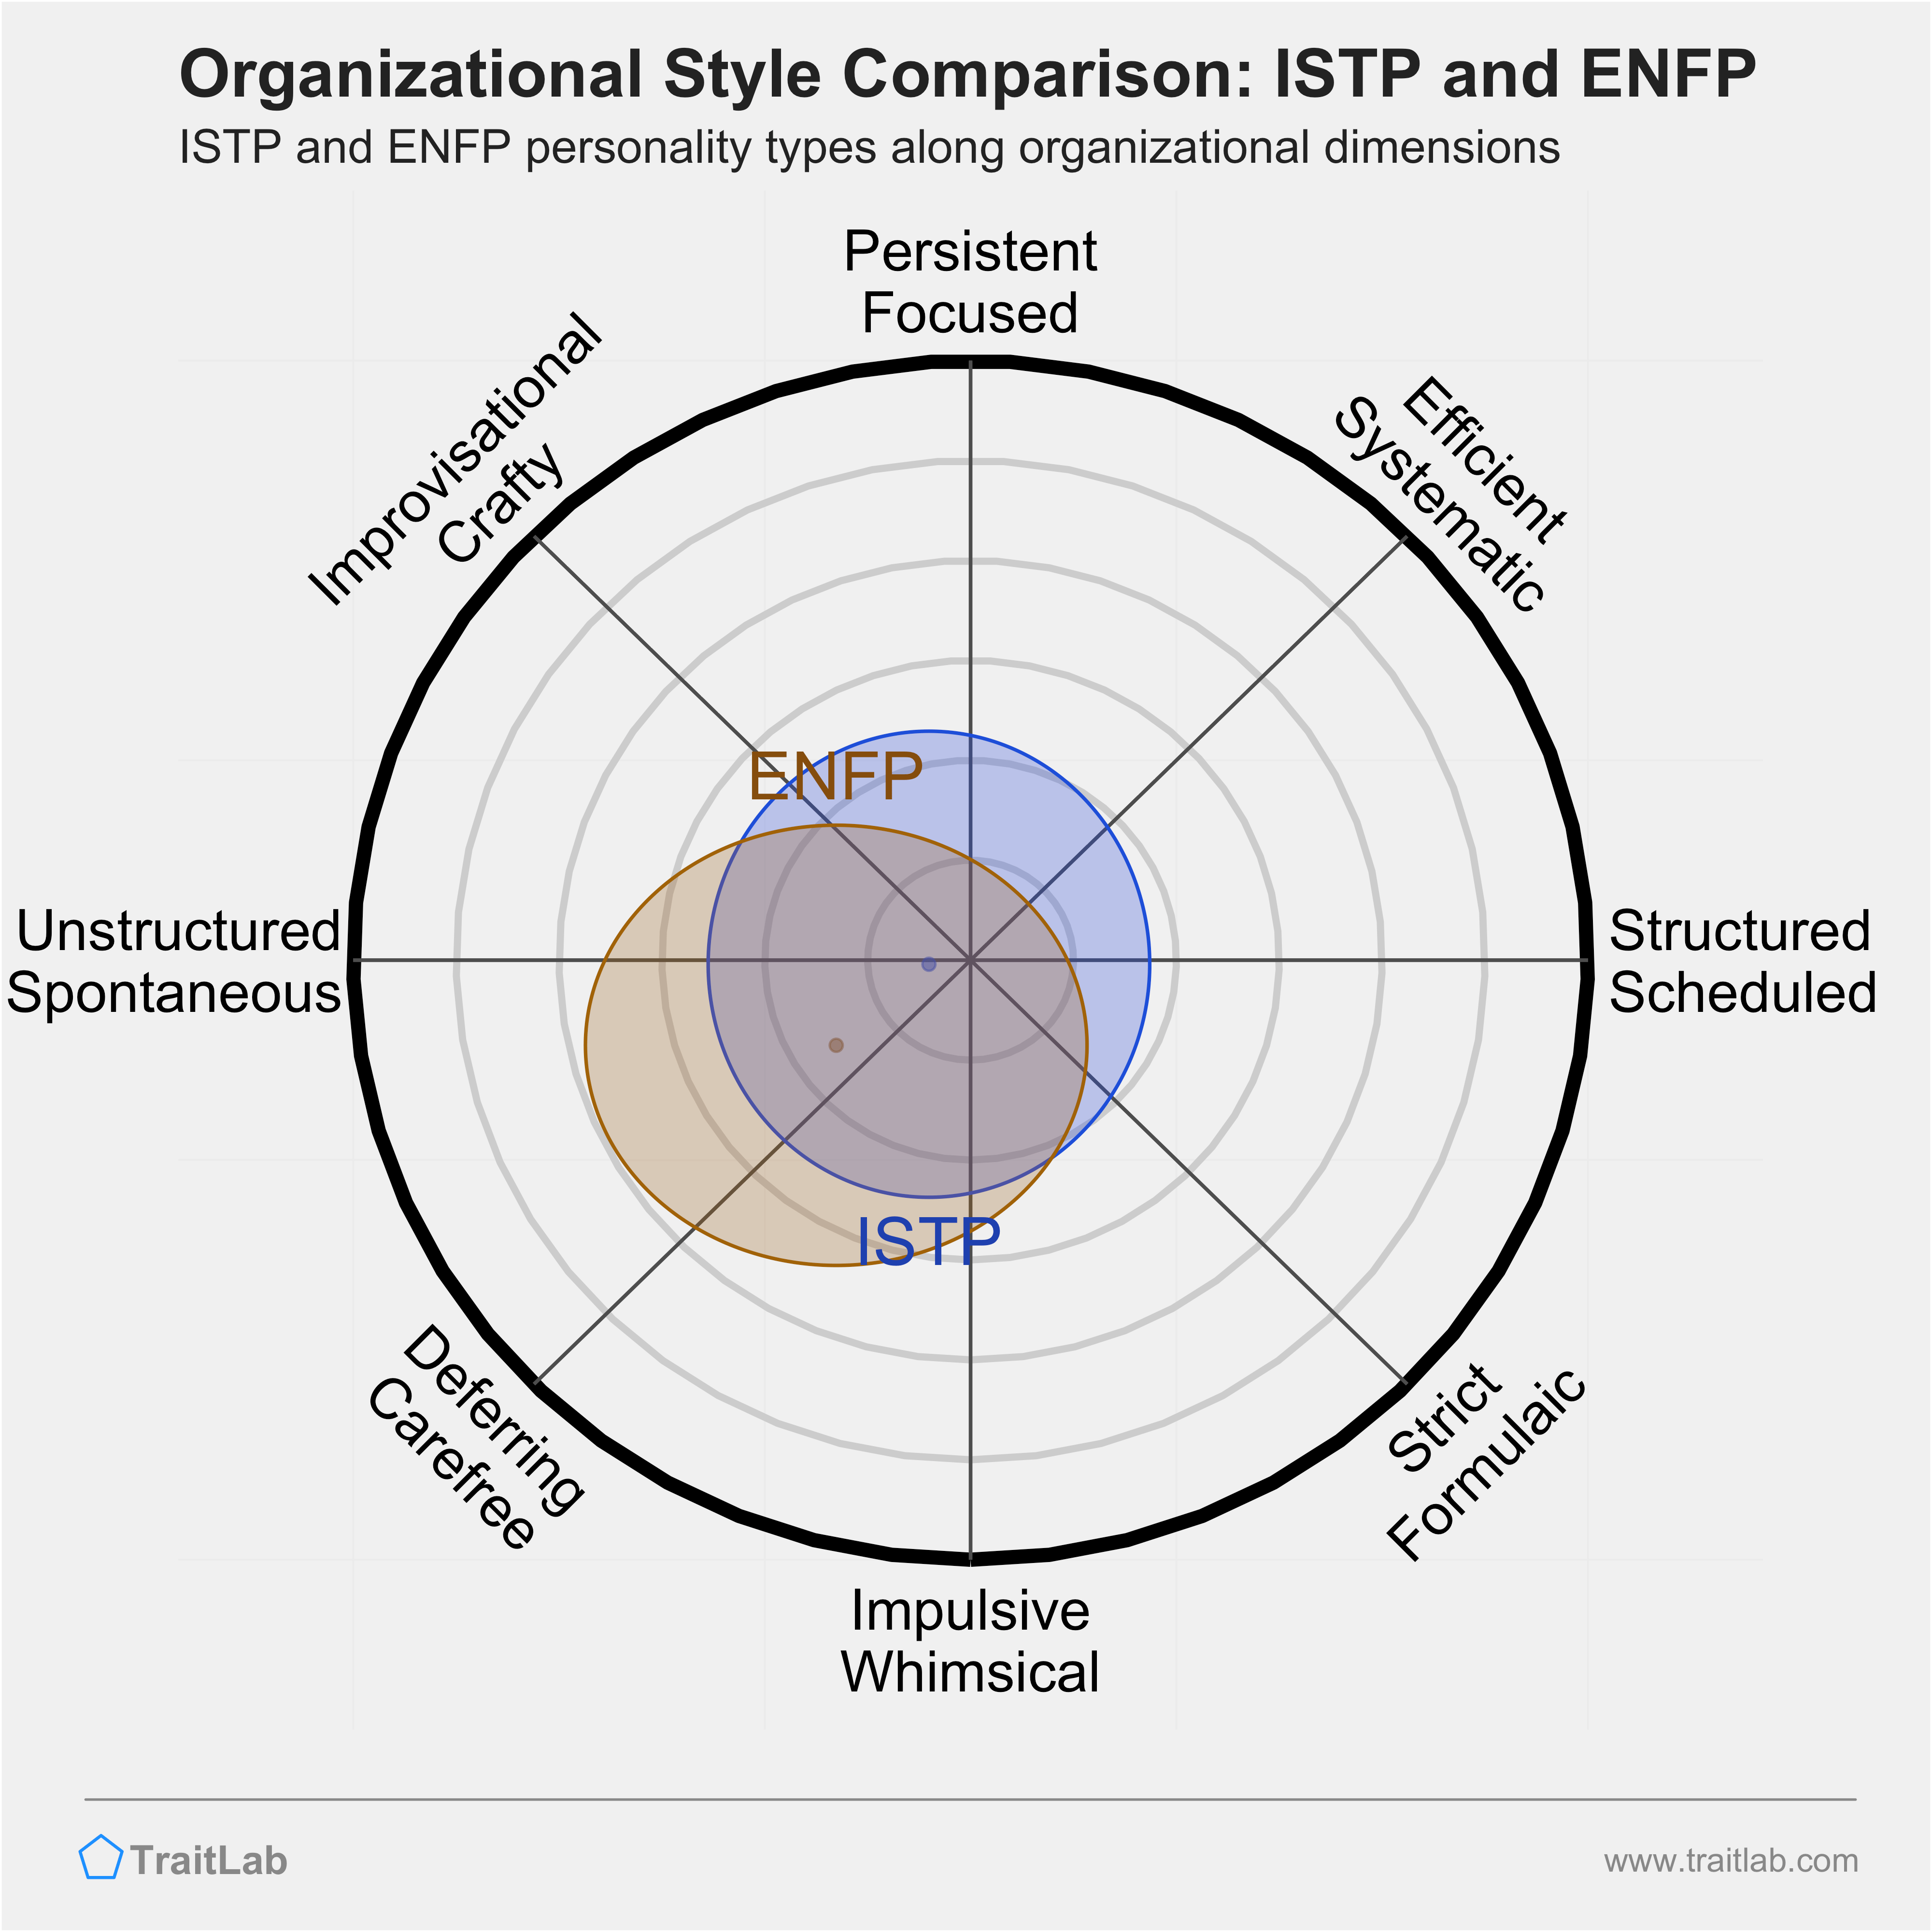 ISTP and ENFP comparison across organizational dimensions